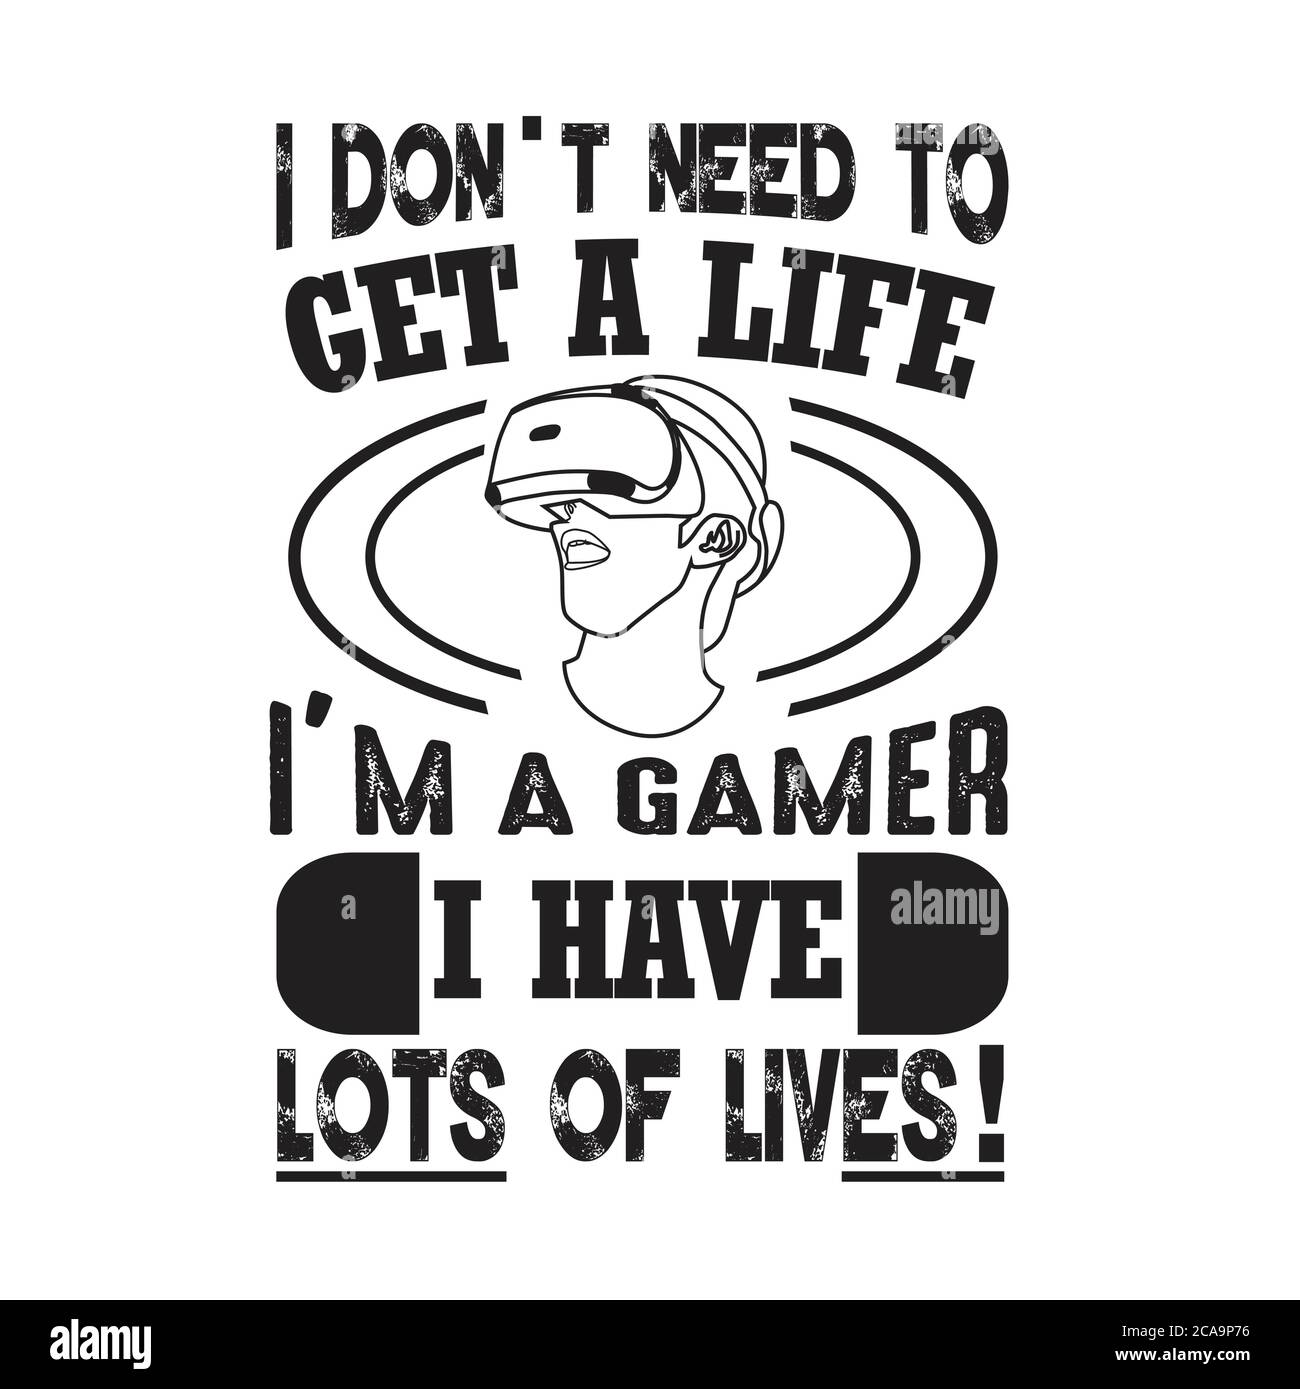 Gamer Funny Meme- I dont need to get a life, am a gamer with many lives |  Sticker